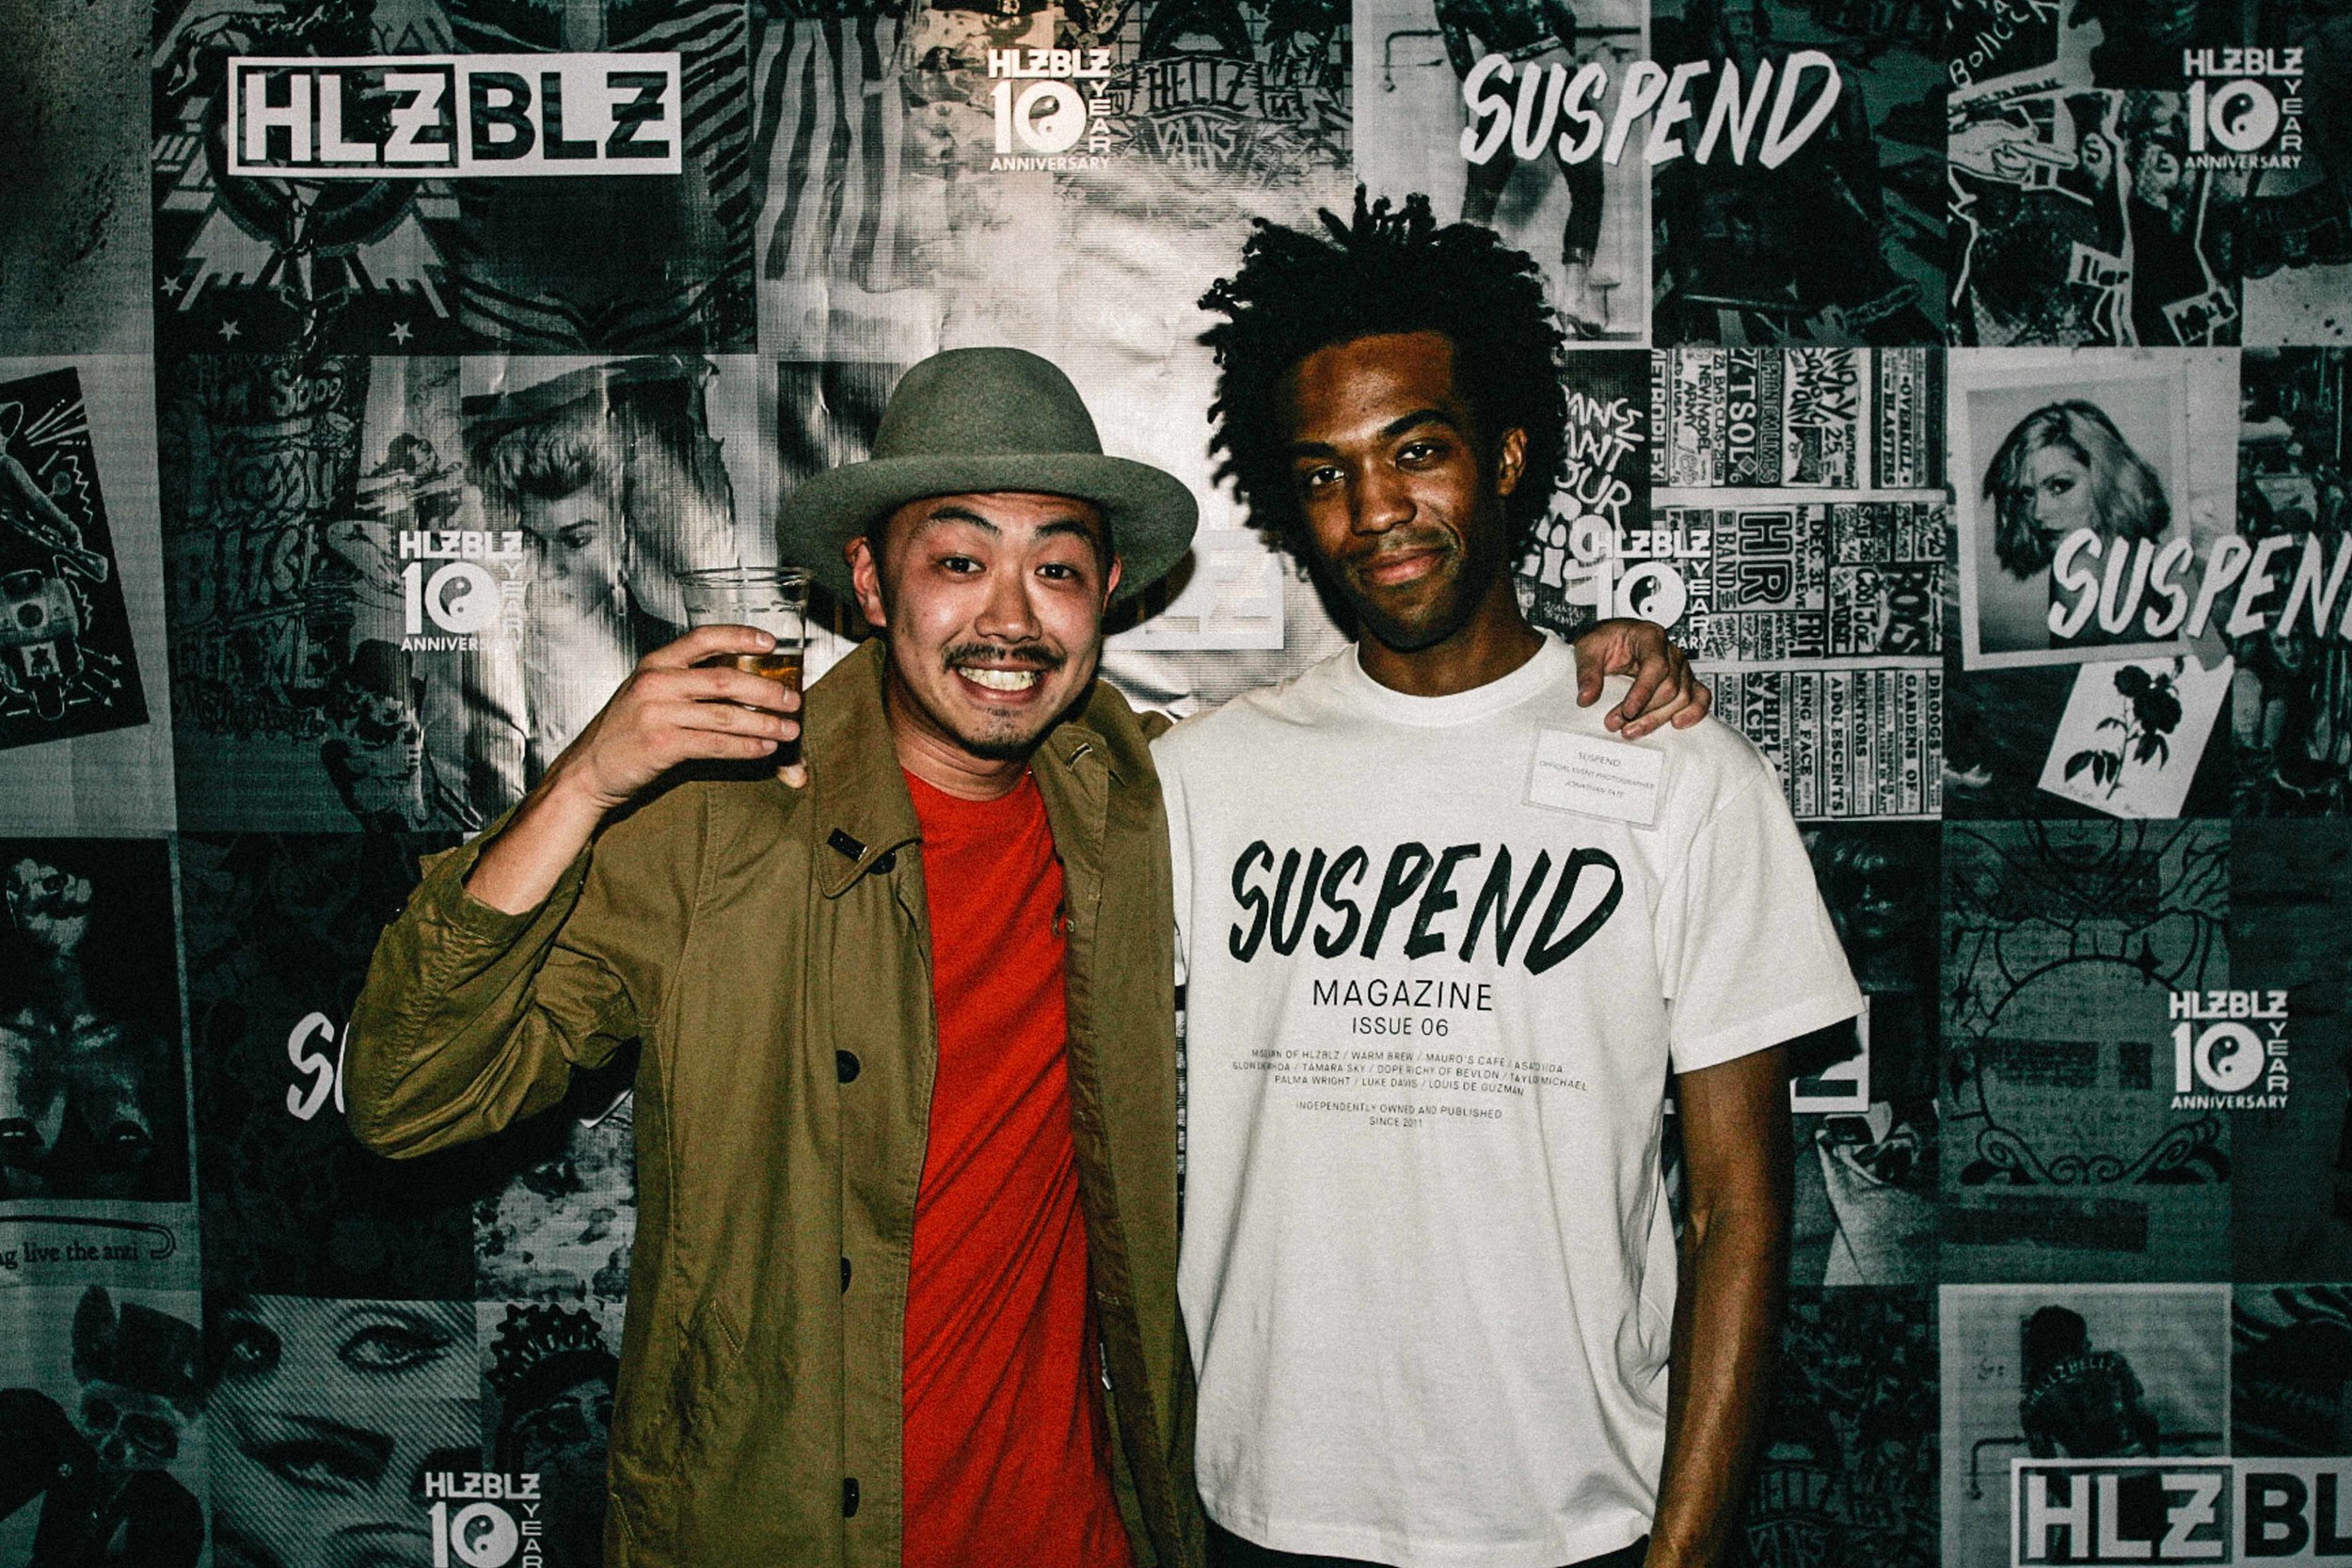  Asato Iida and Jonathan Tate at the ISSUE 06 Release Party x 10YR HLZBLZ Anniversary (Feb 11) at Globe Theater. / Photo: © Jonathan Tate for SUSPEND Magazine. 